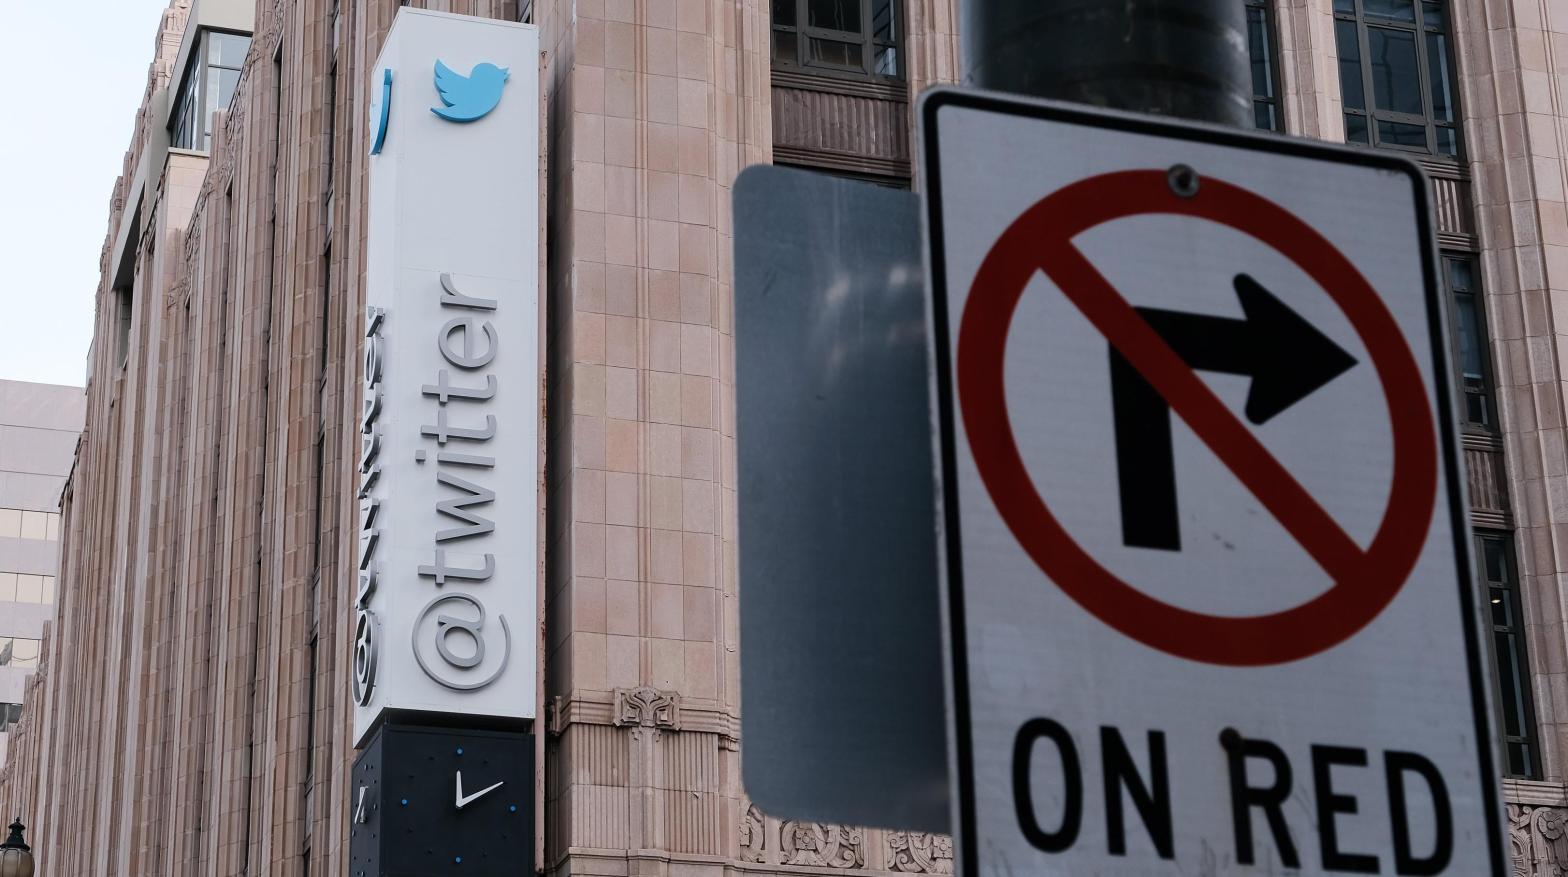 Twitter wasted little time firing half of its global employees, but the process was apparently so haphazard that the company now needs to rehire some of those it let go. (Photo: David Odisho, Getty Images)